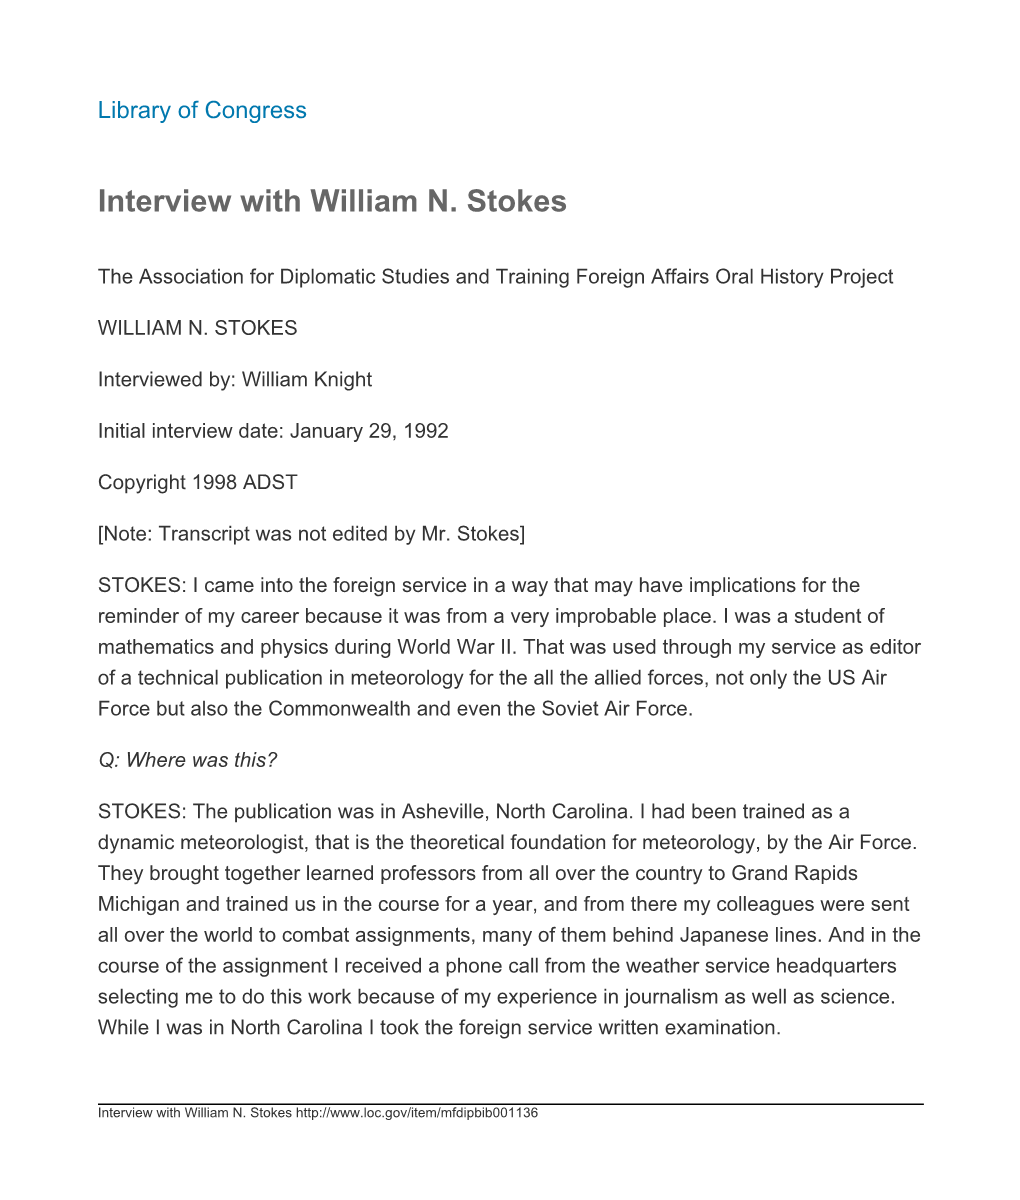 Interview with William N. Stokes